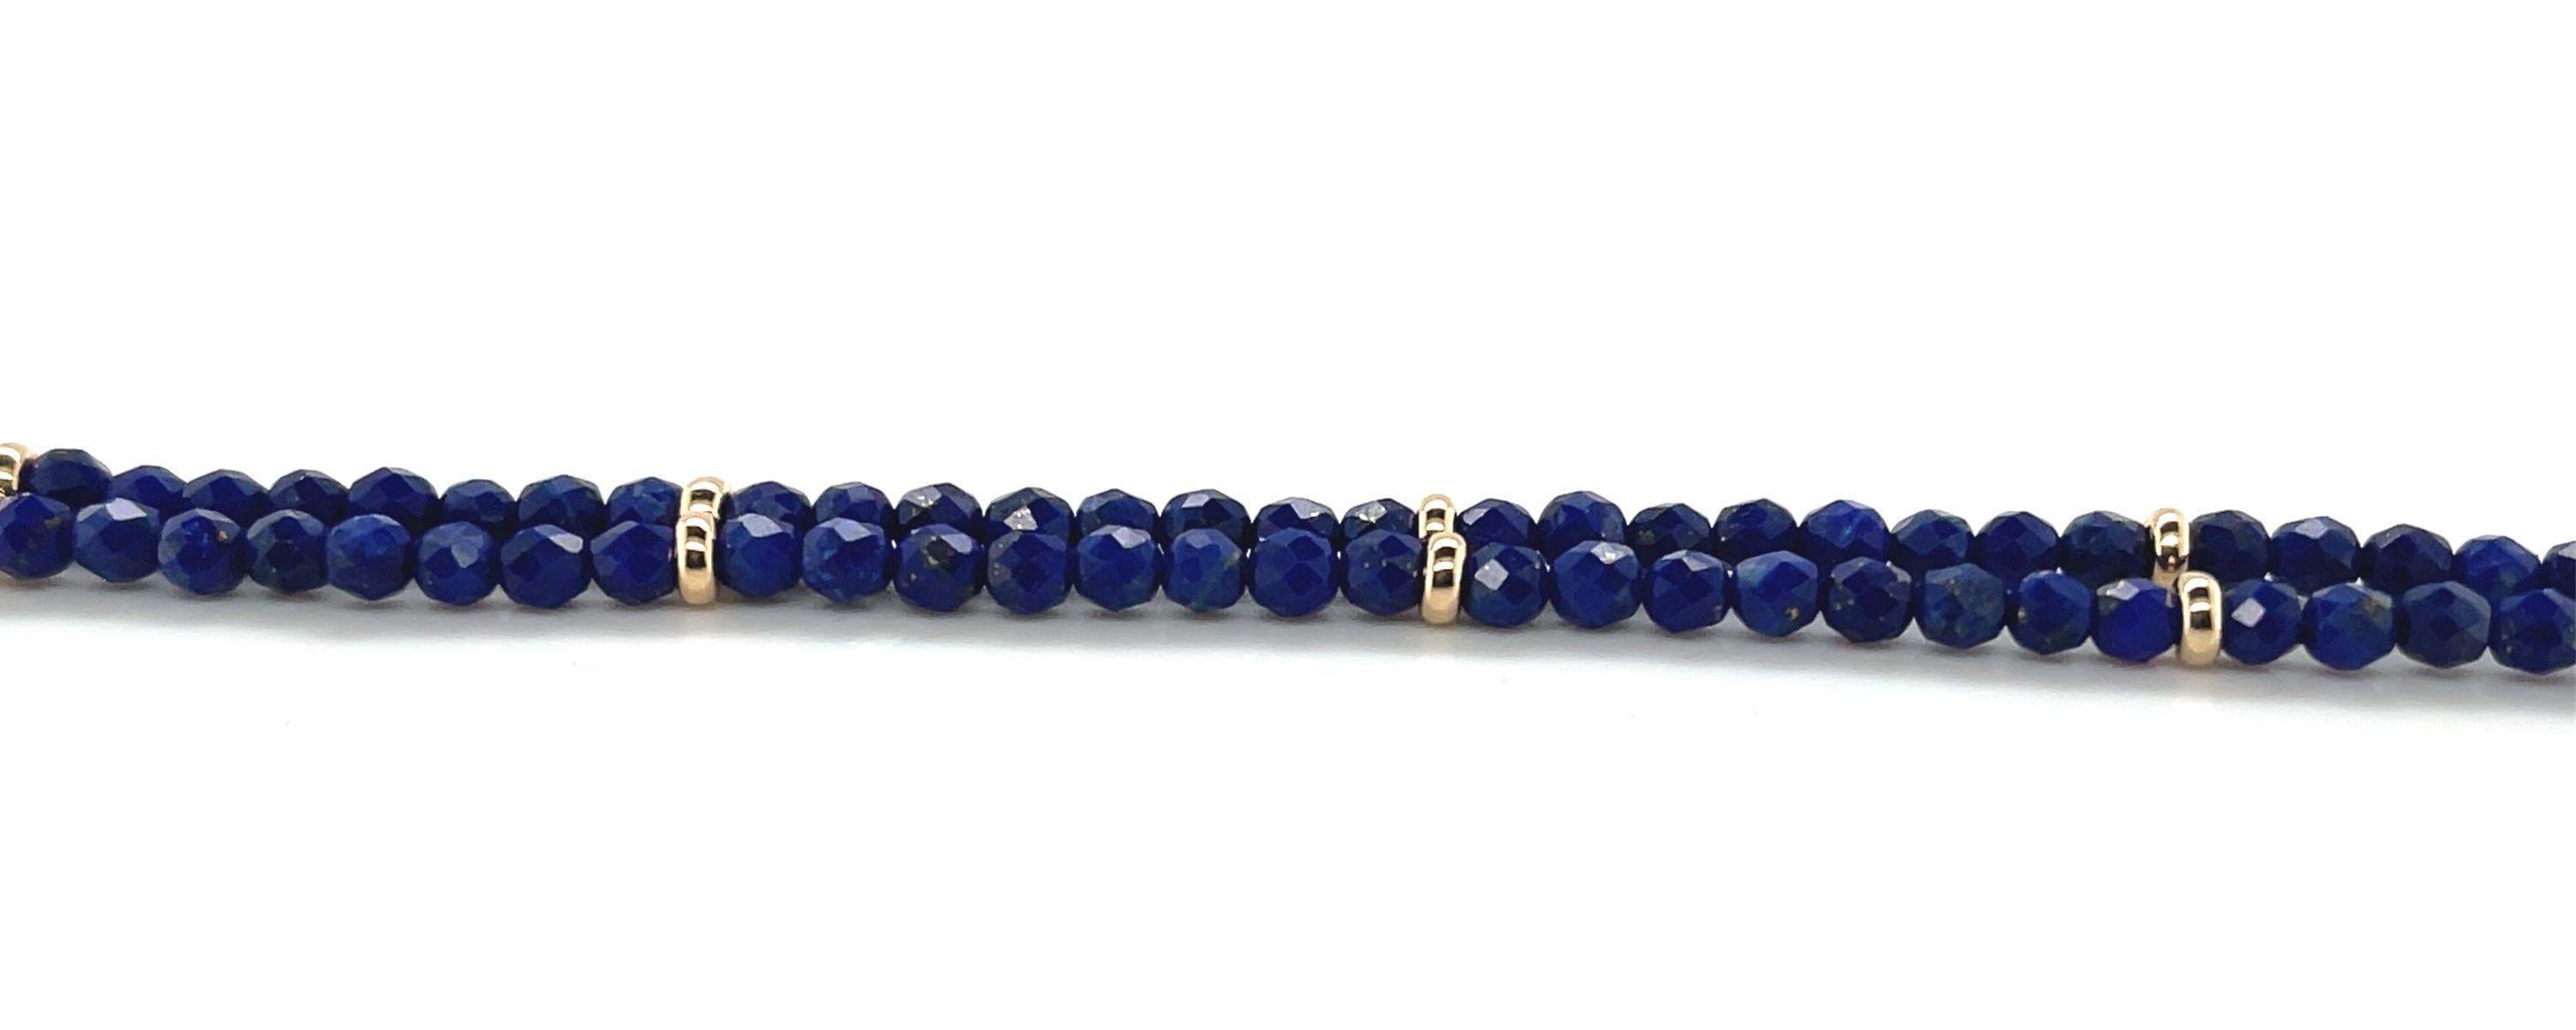 Faceted Lapis Bead Necklace with Yellow Gold Accents, 36 Inches In New Condition For Sale In Los Angeles, CA